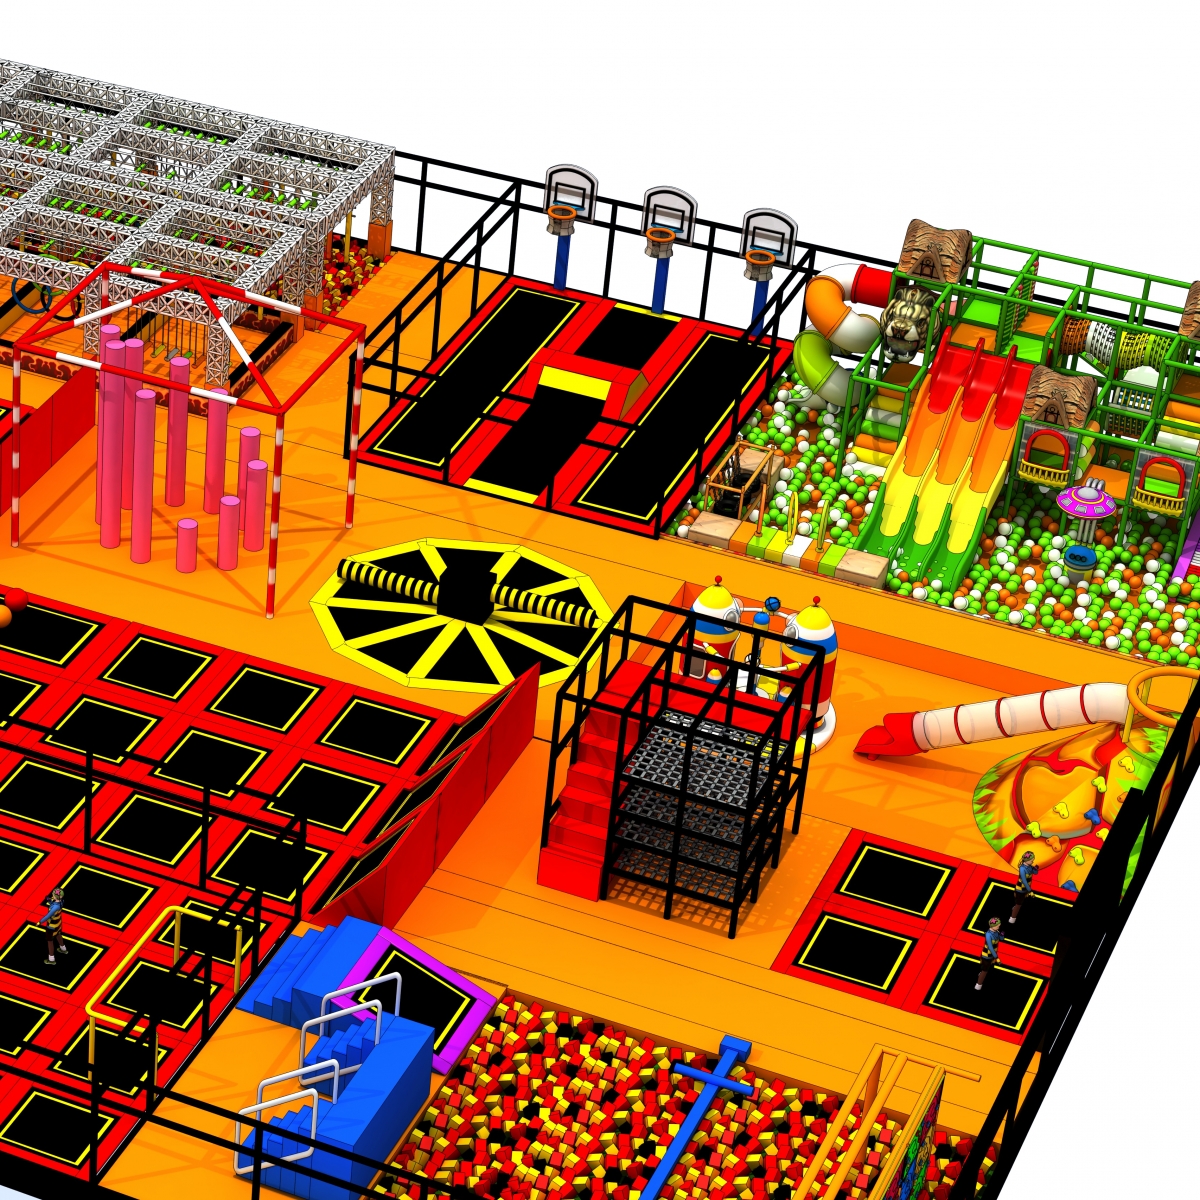 I1A0001-Indoor Playground Solution-SPIRIT PLAY,Outdoor Playground, Indoor Playground,Trampoline Park,Outdoor Fitness,Inflatable,Soft Playground,Ninja Warrior,Trampoline Park,Playground Structure,Play Structure,Outdoor Fitness,Water Park,Play System,Freestanding,Interactive,independente ,Inklusibo, Park, Pagsaka sa Bungbong, Dula sa Bata